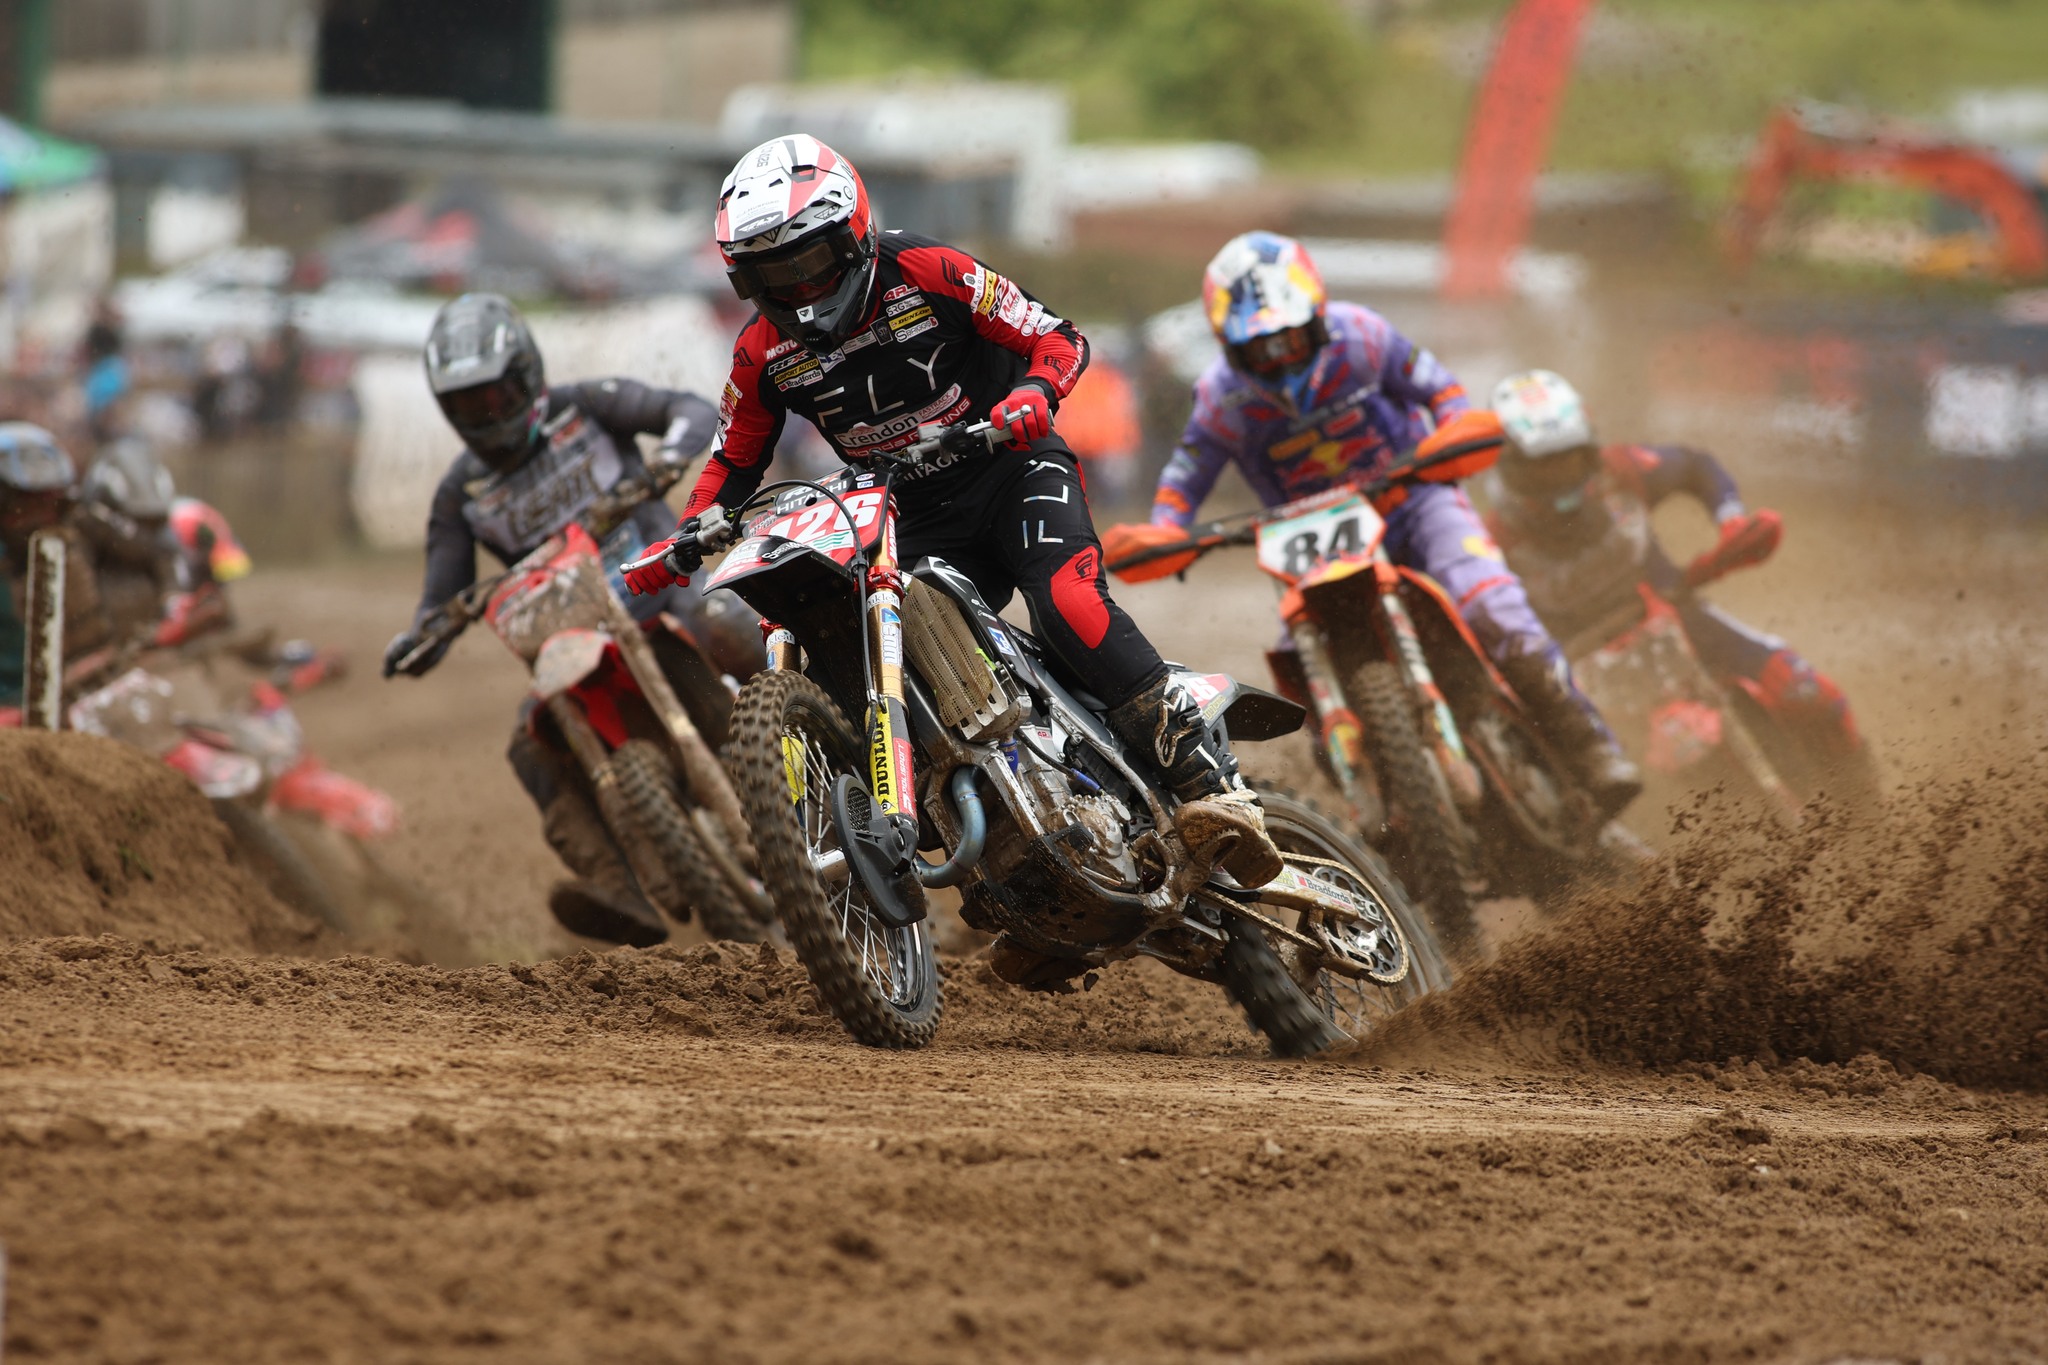 ACU announce the British Motocross Championship will be run by the ACU from 2025 onwards